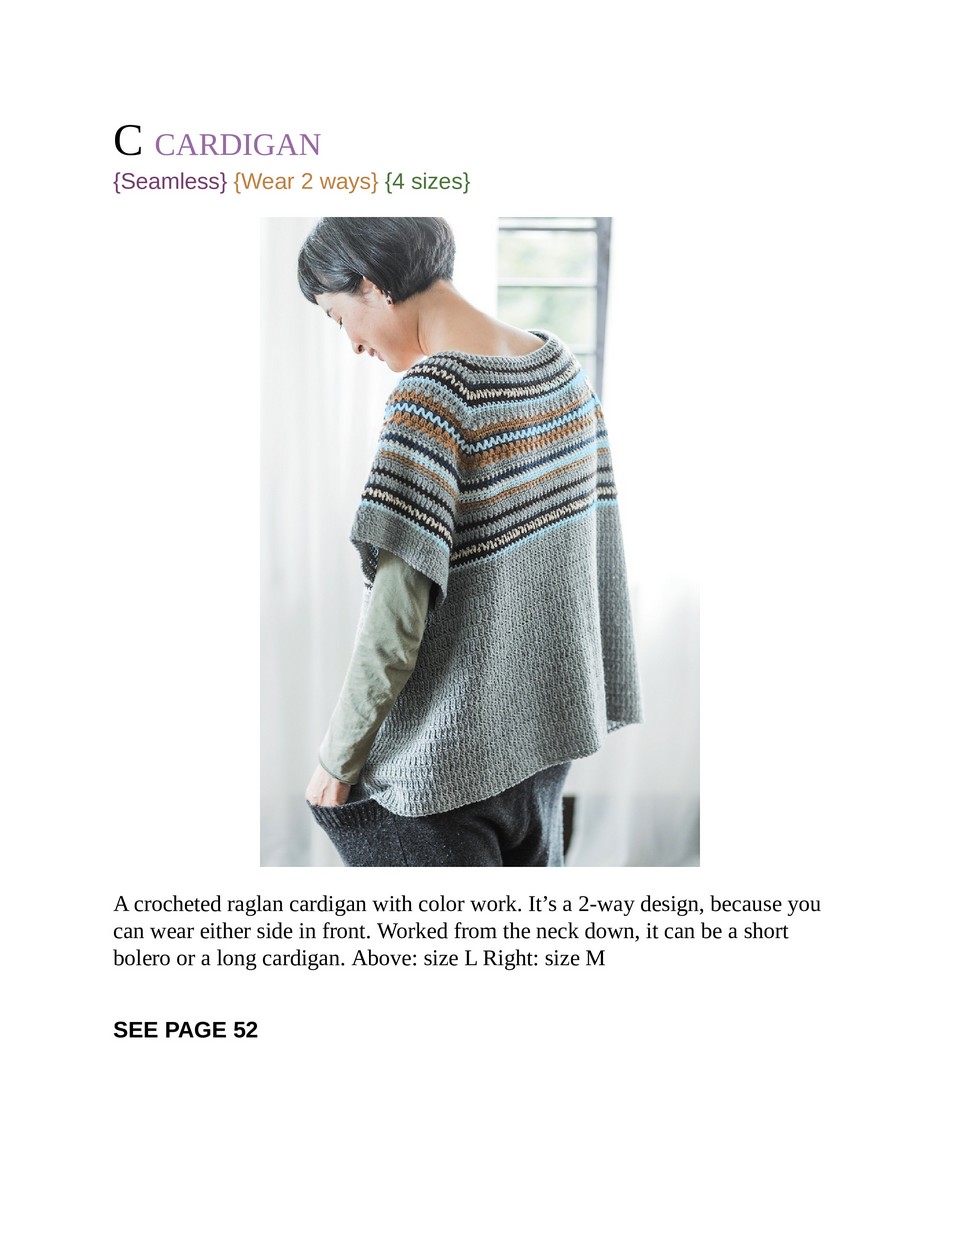 Japanese Knitting Patterns for Sweaters Scarves and More-35